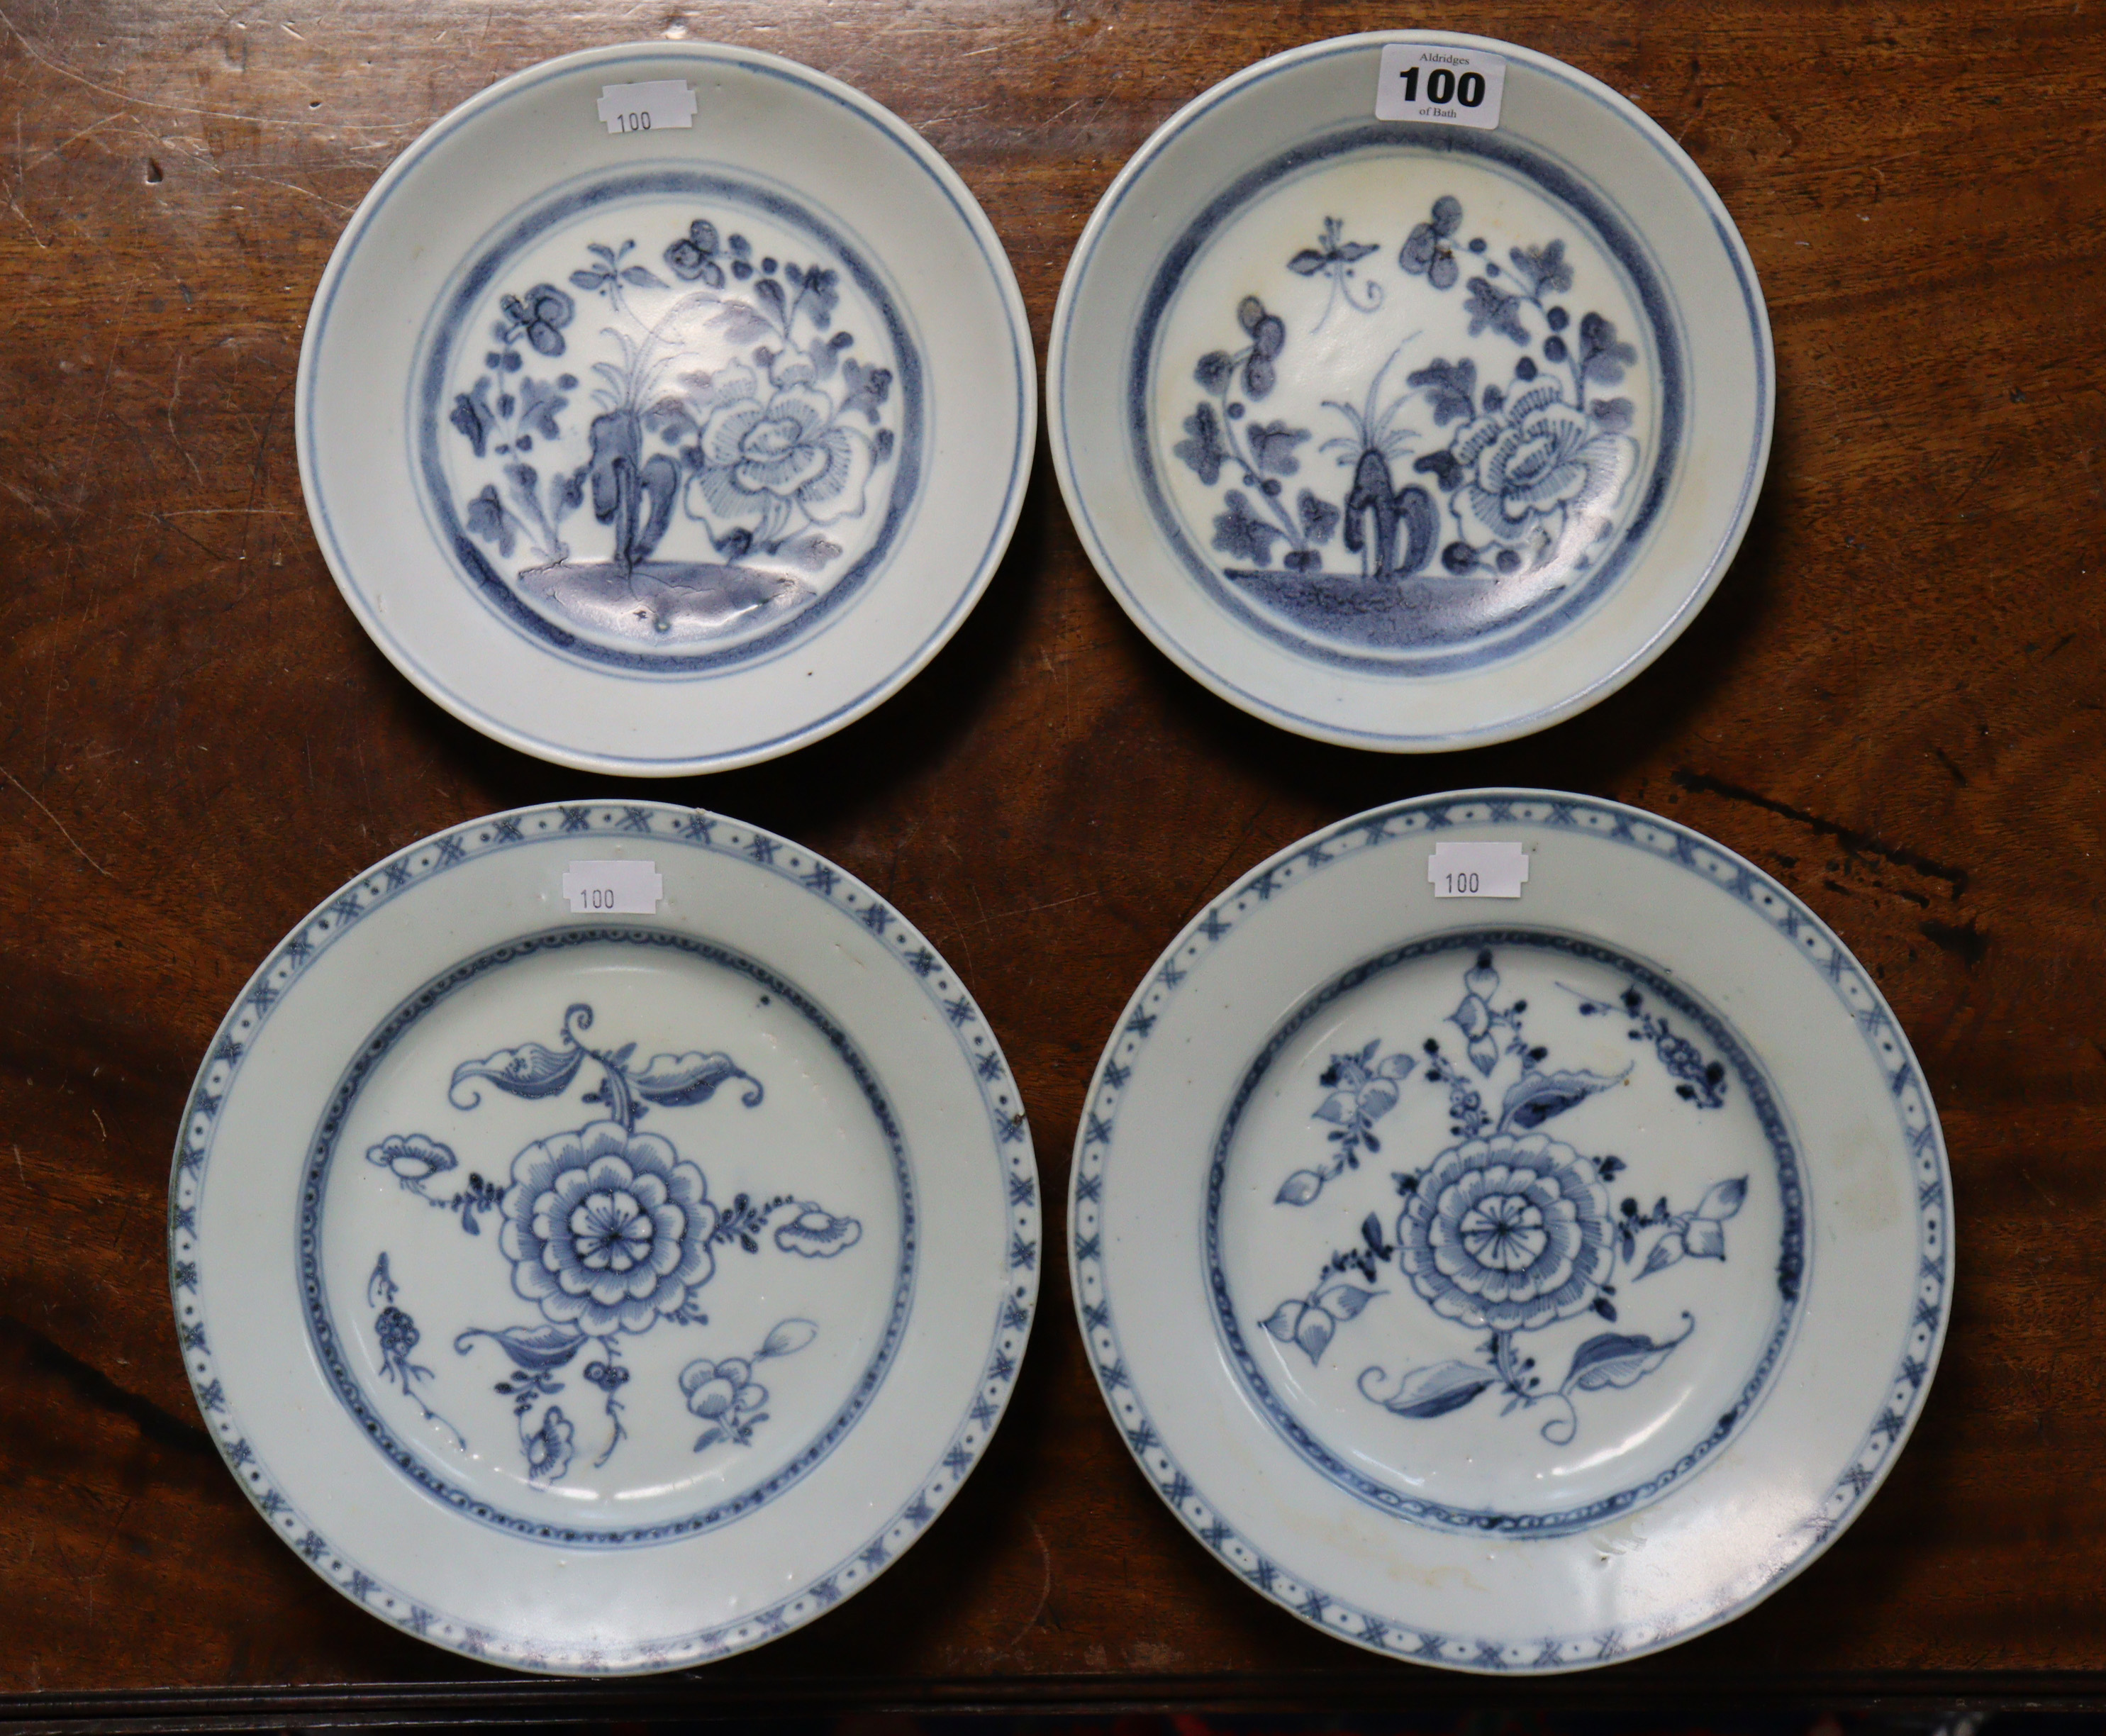 Tek Sing shipwreck cargo: a group of four provincial Chinese porcelain plates, with peony, butterfly